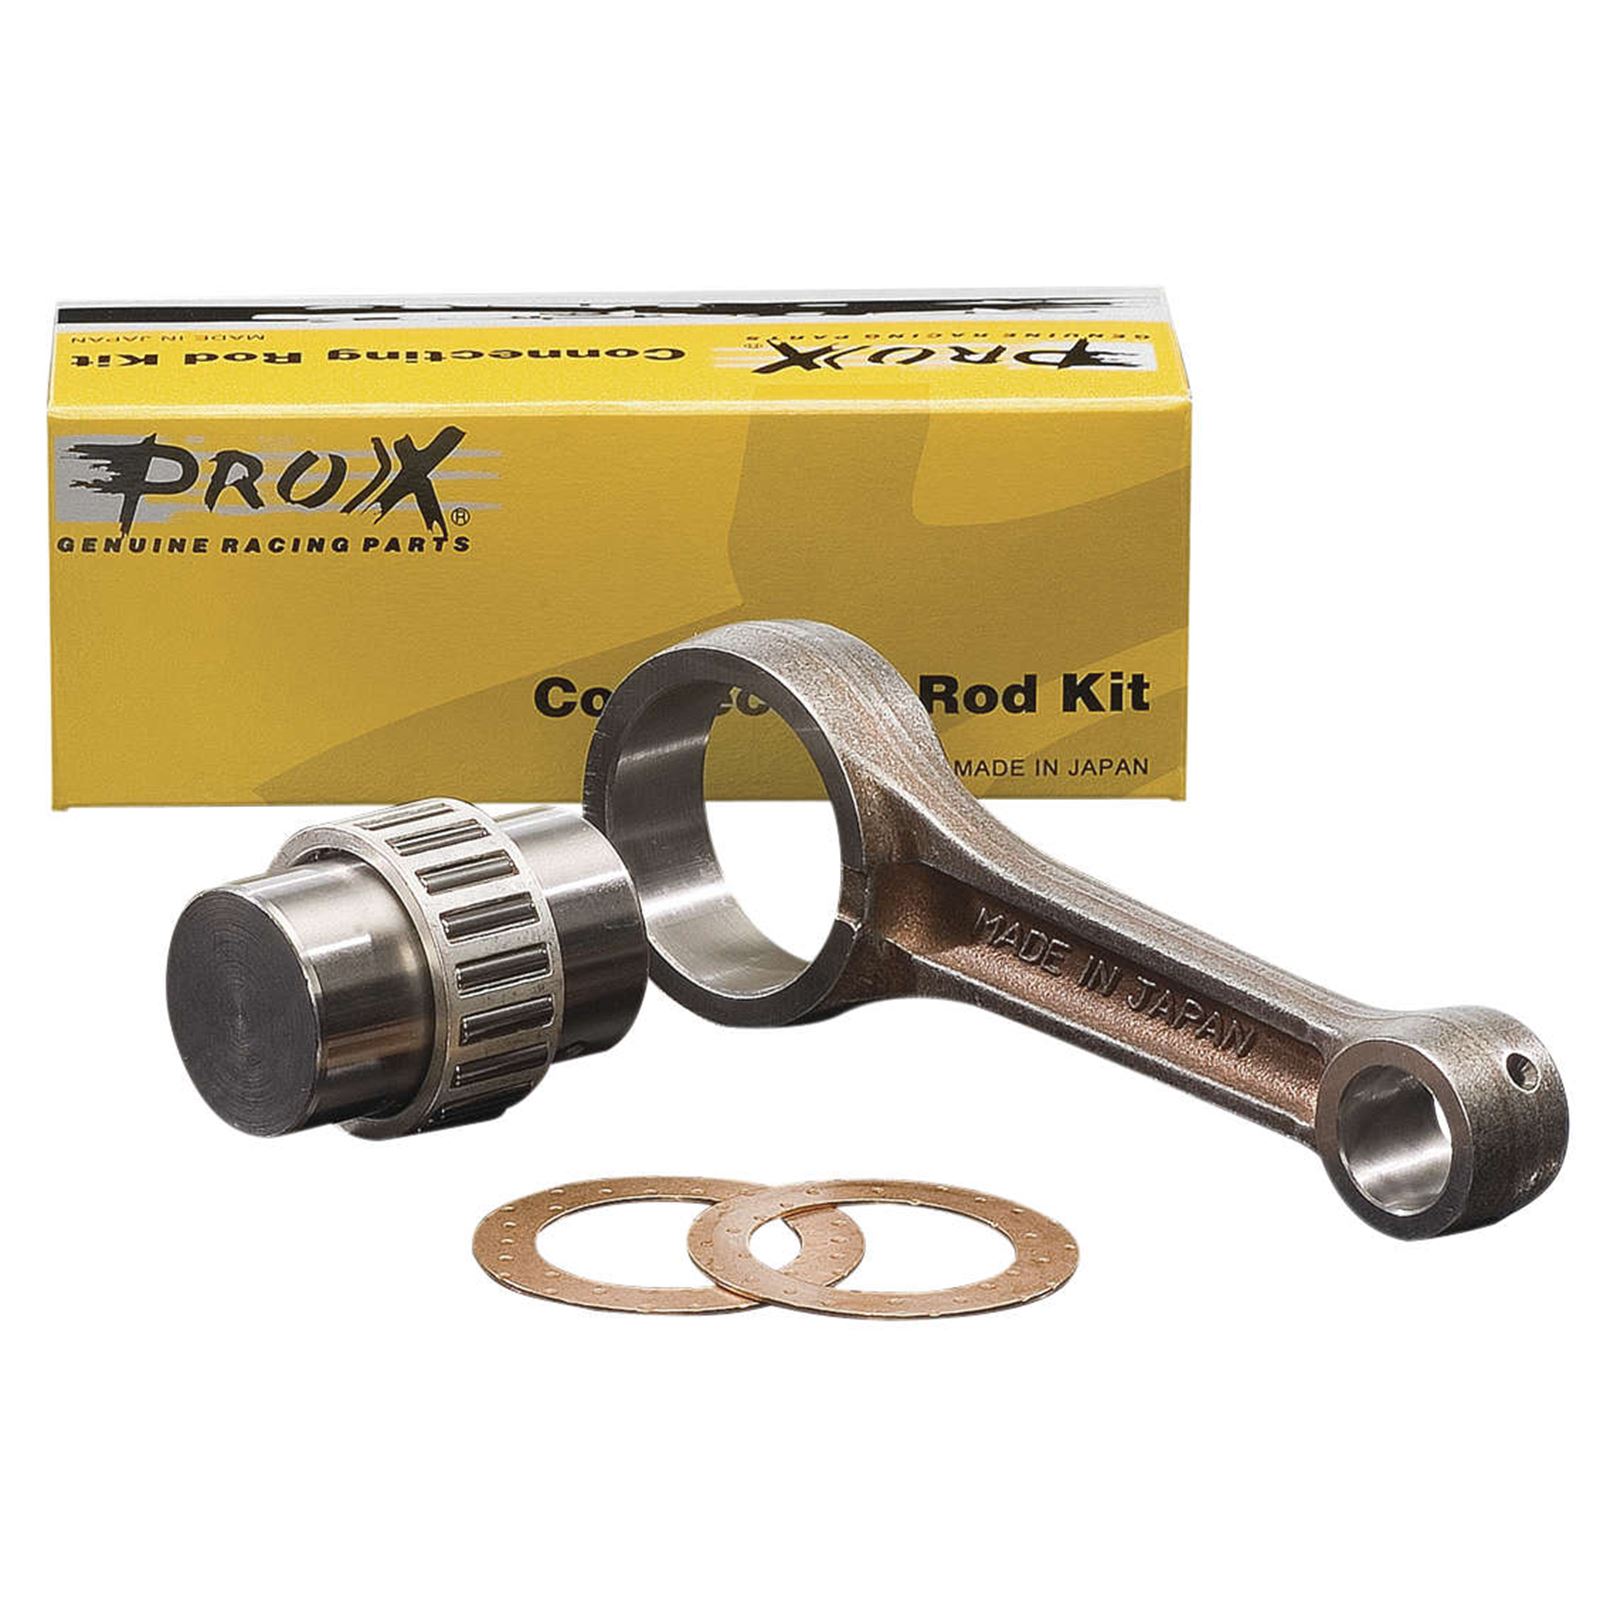 Prox Racing Parts 03.2309 Connecting Rod Kit 